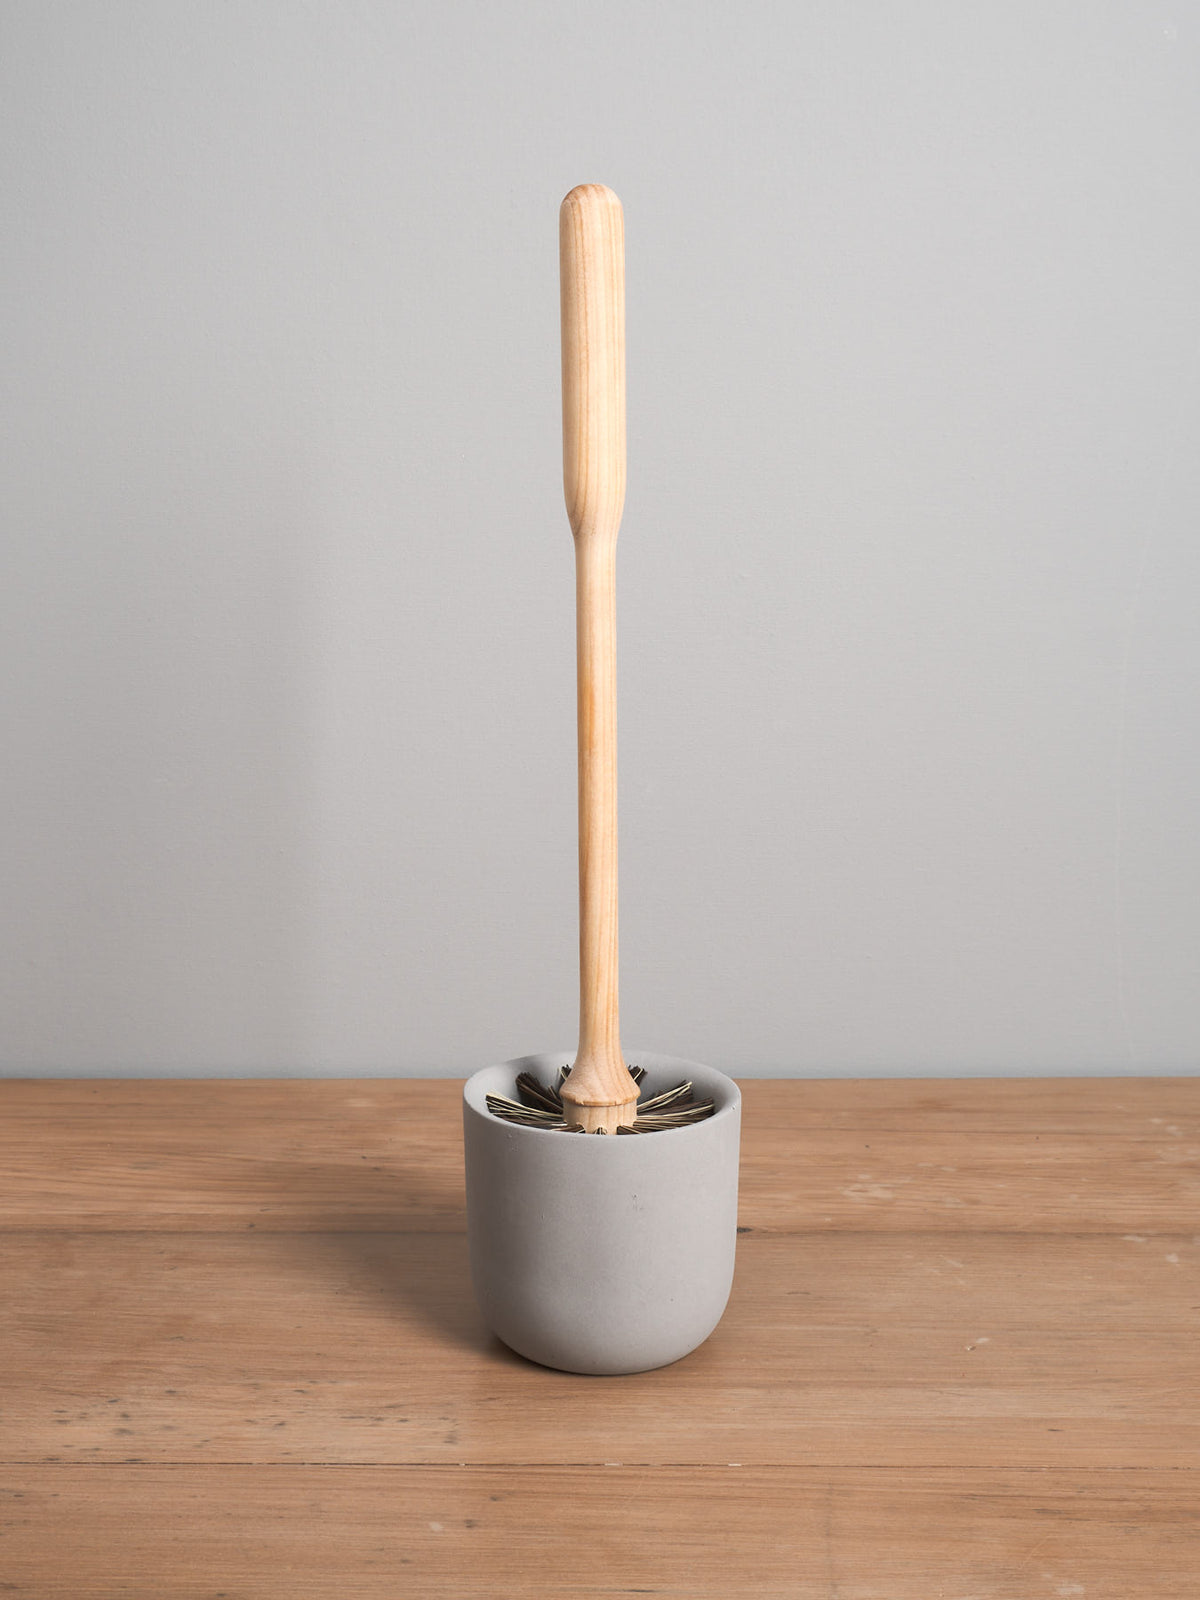 An Iris Hantverk toilet brush with a concrete cup on top of a wooden table.